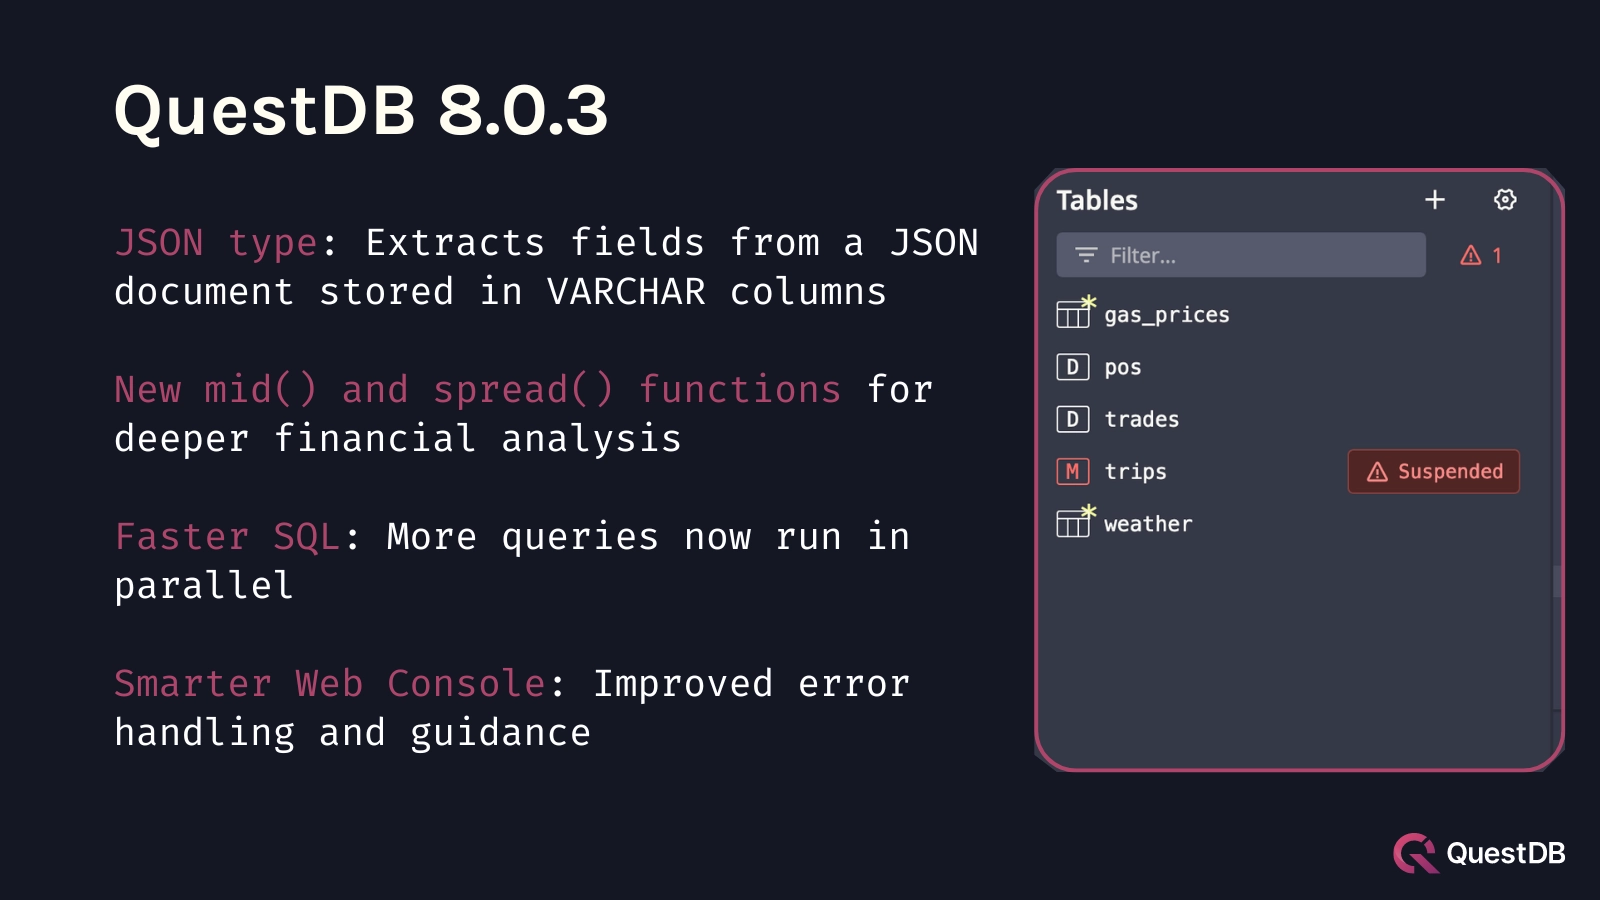 Banner for blog post with title "QuestDB 8.0.3 - JSON support, smarter Web Console, and more"